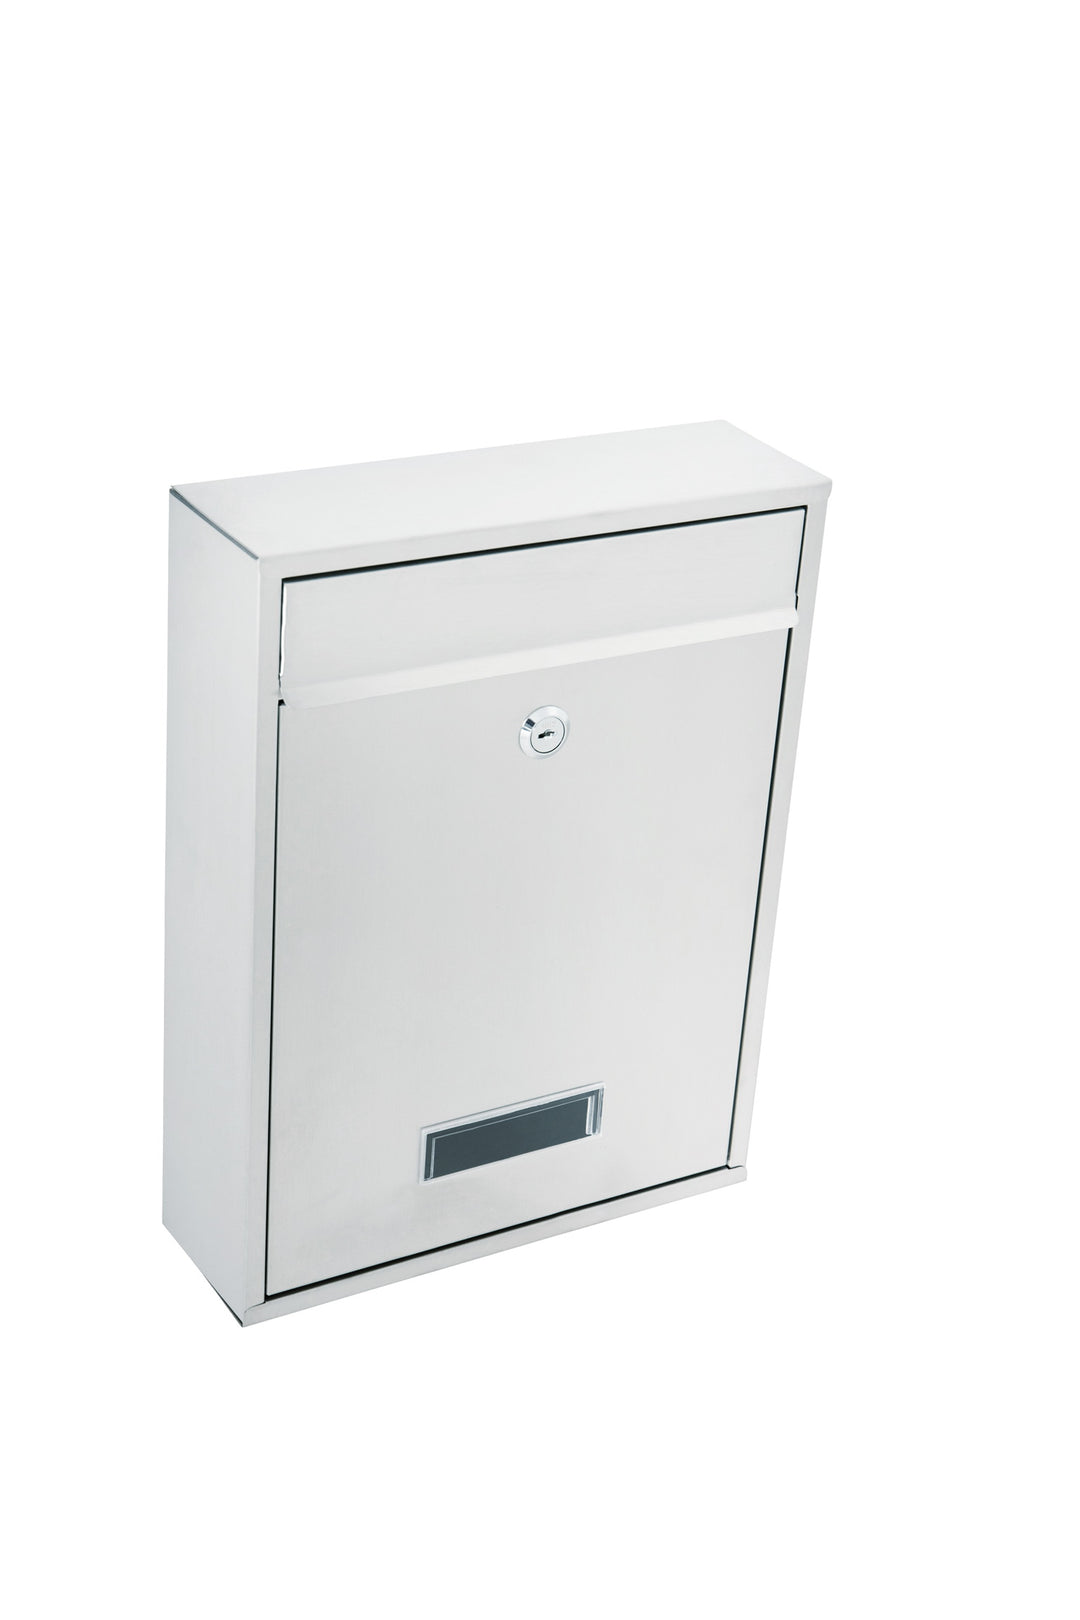 Lee Stainless Letterbox